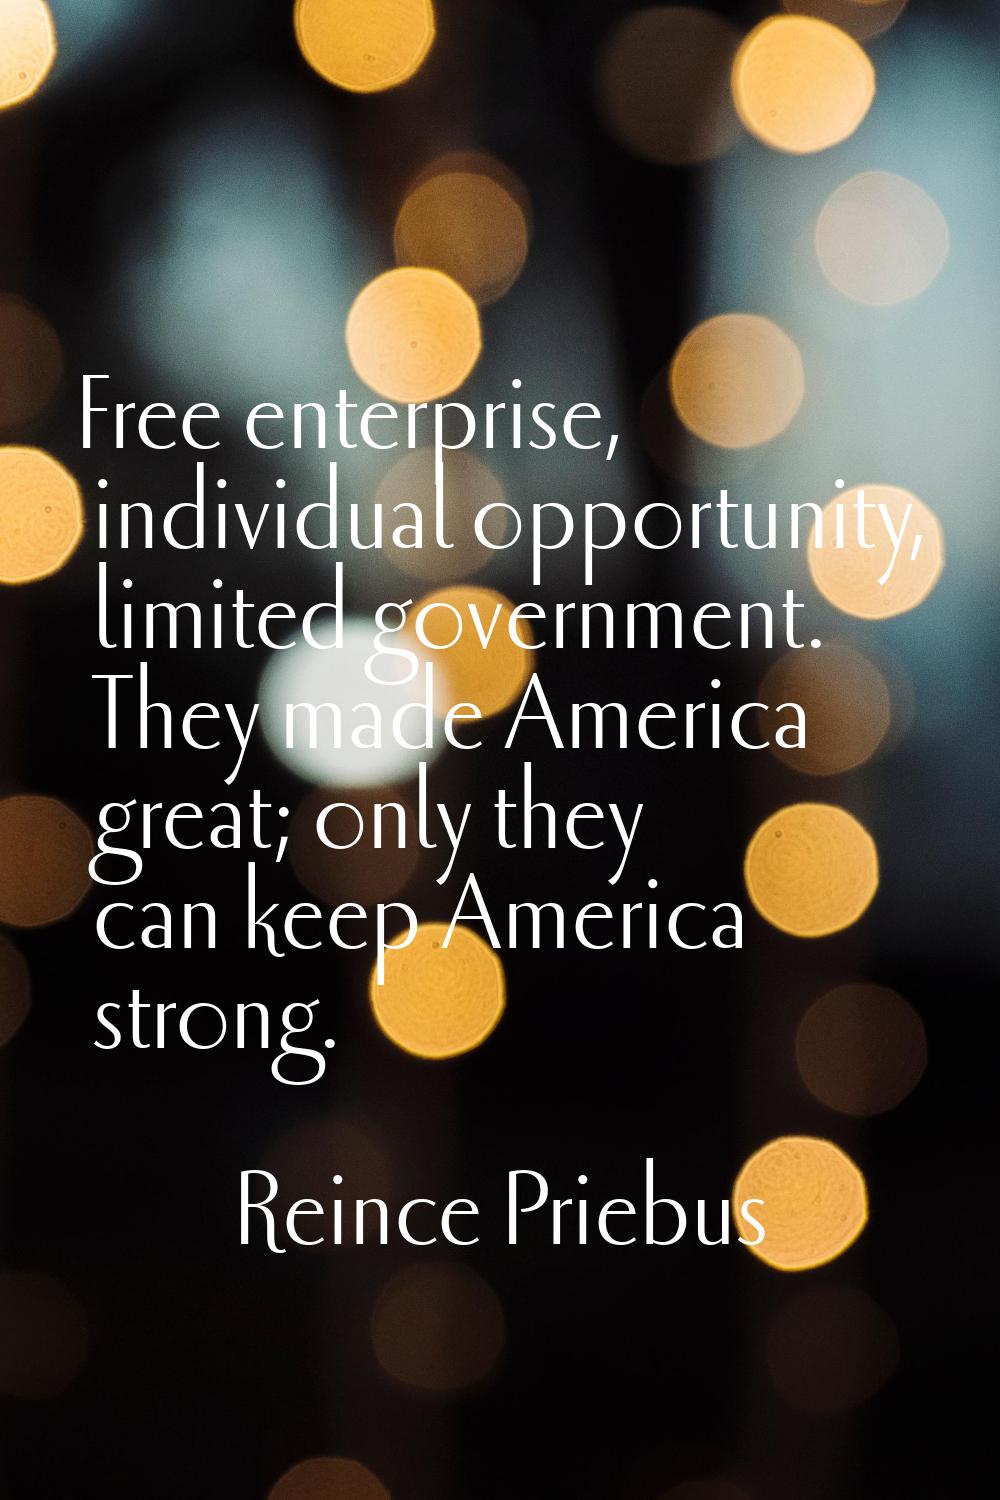 Free enterprise, individual opportunity, limited government. They made America great; only they can